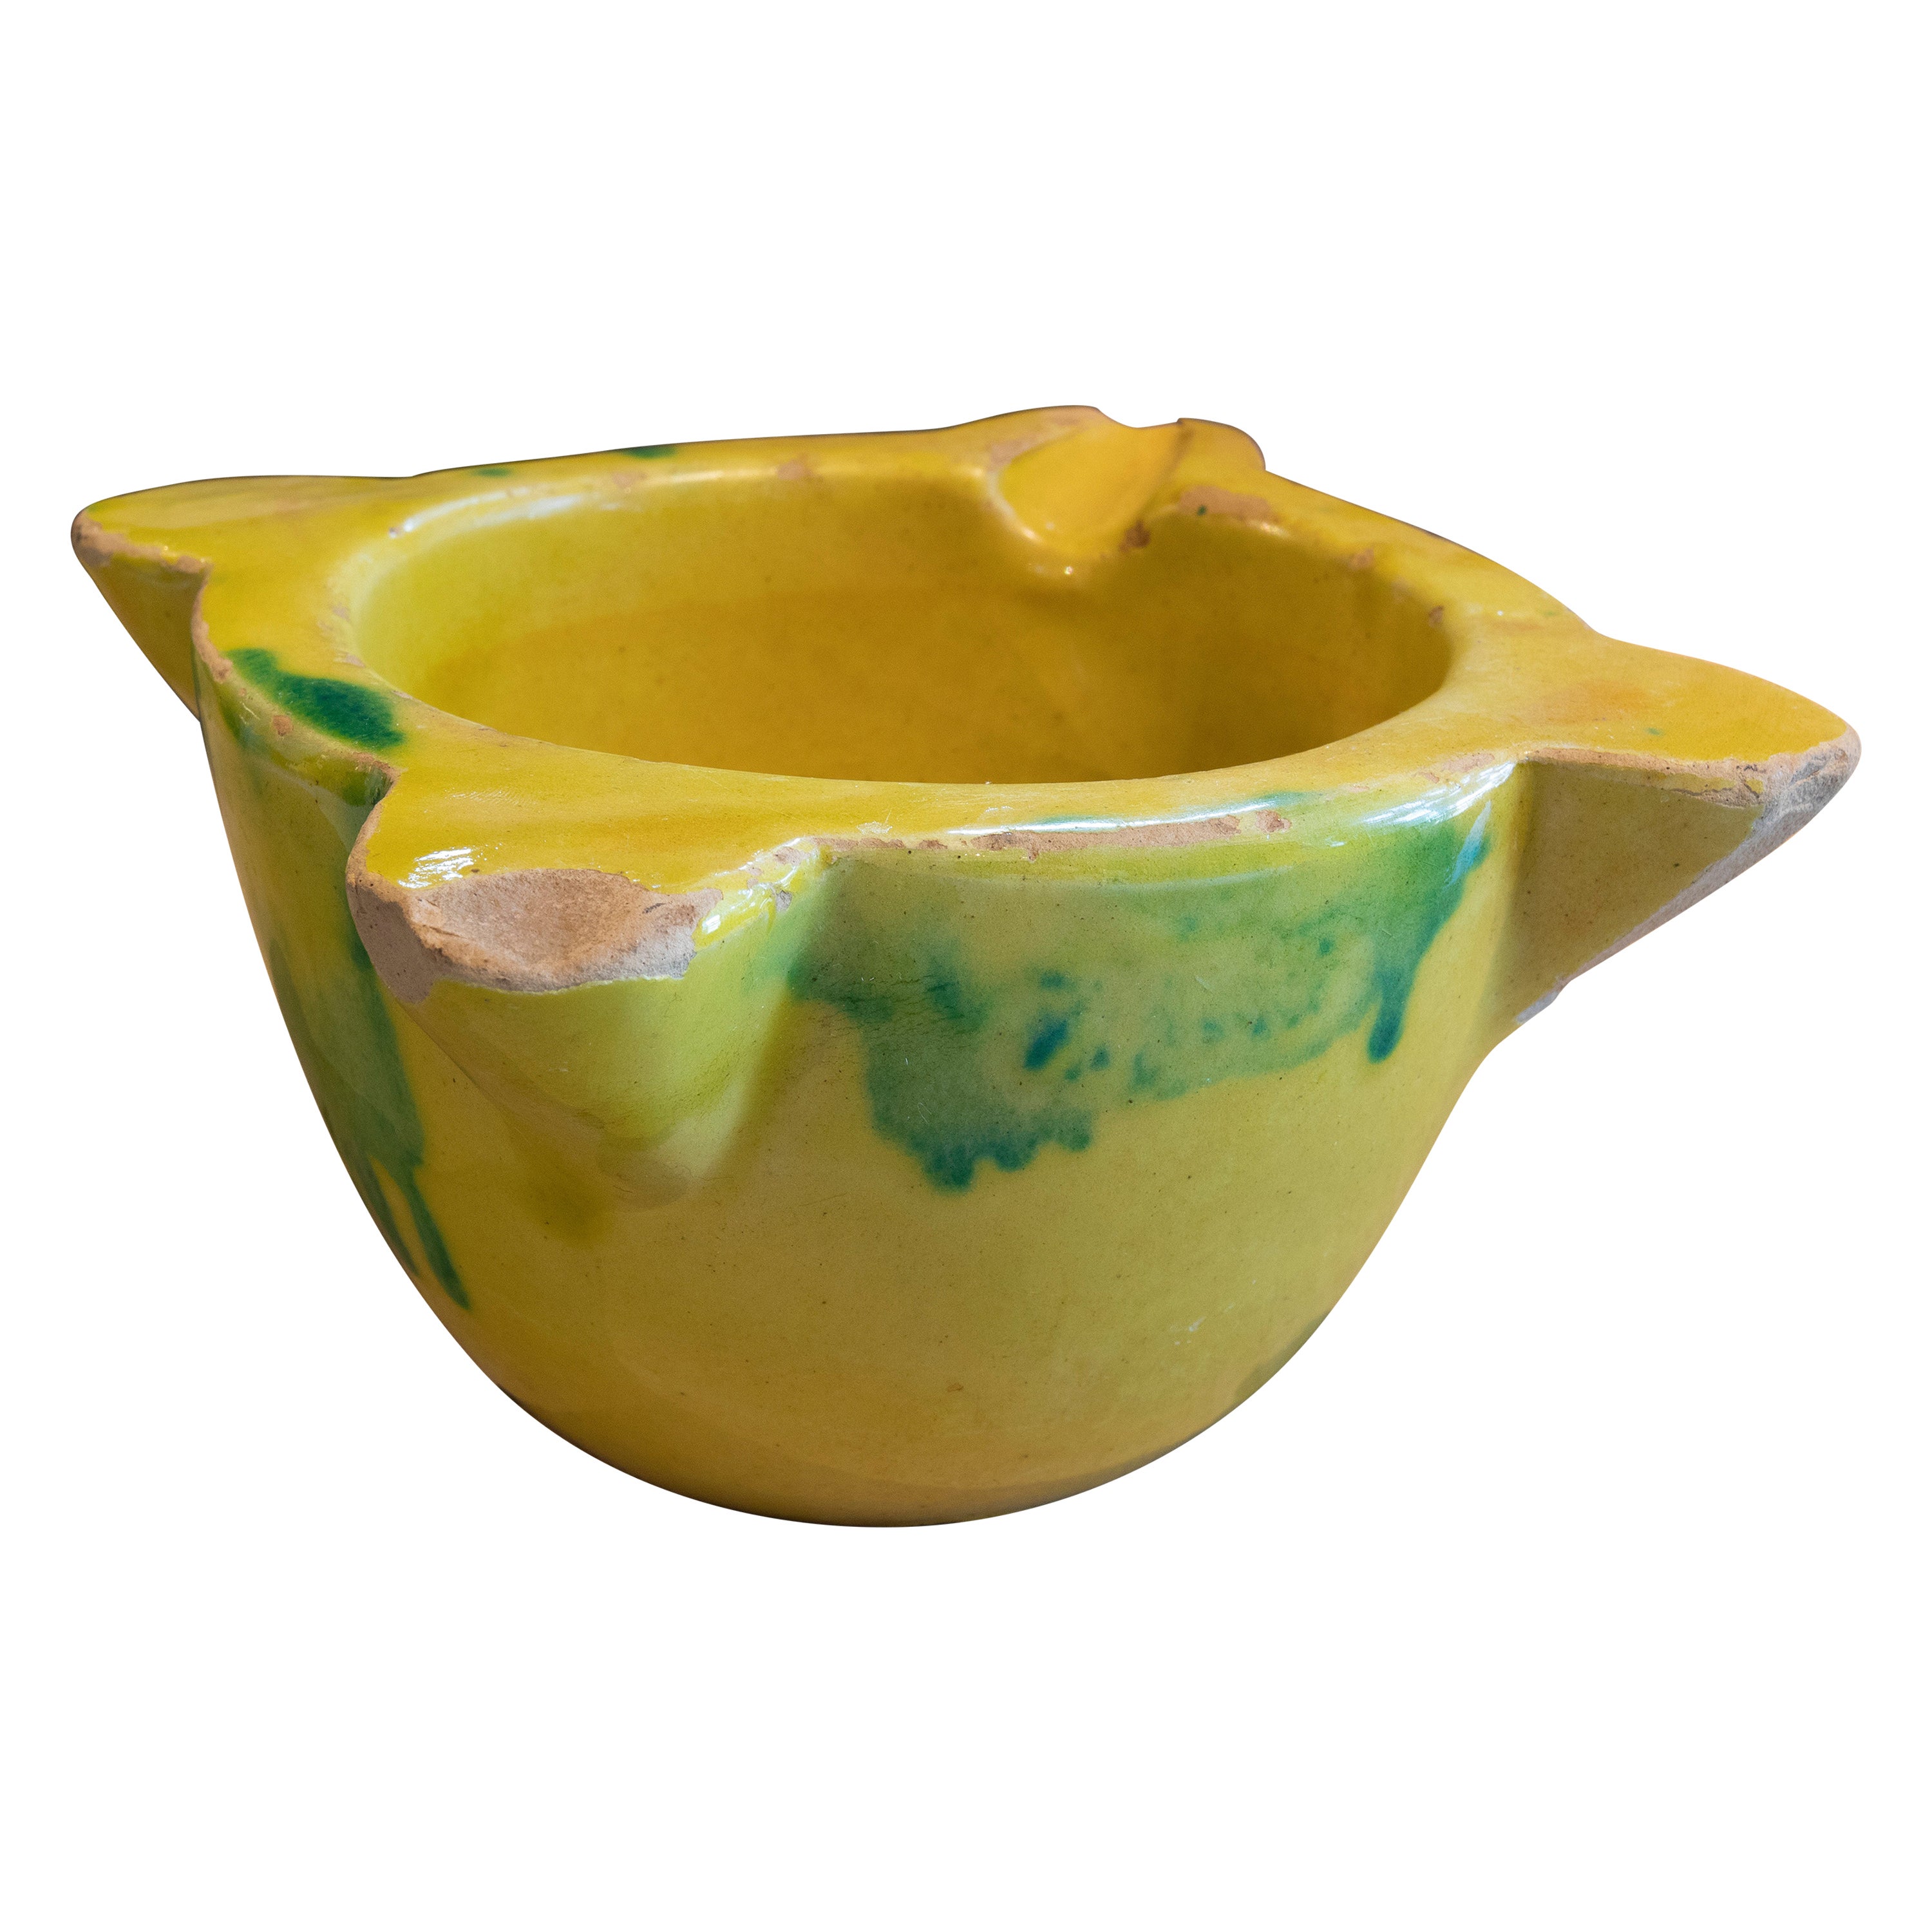 Spanish Glazed Ceramic Mortar in Yellow and Green Color